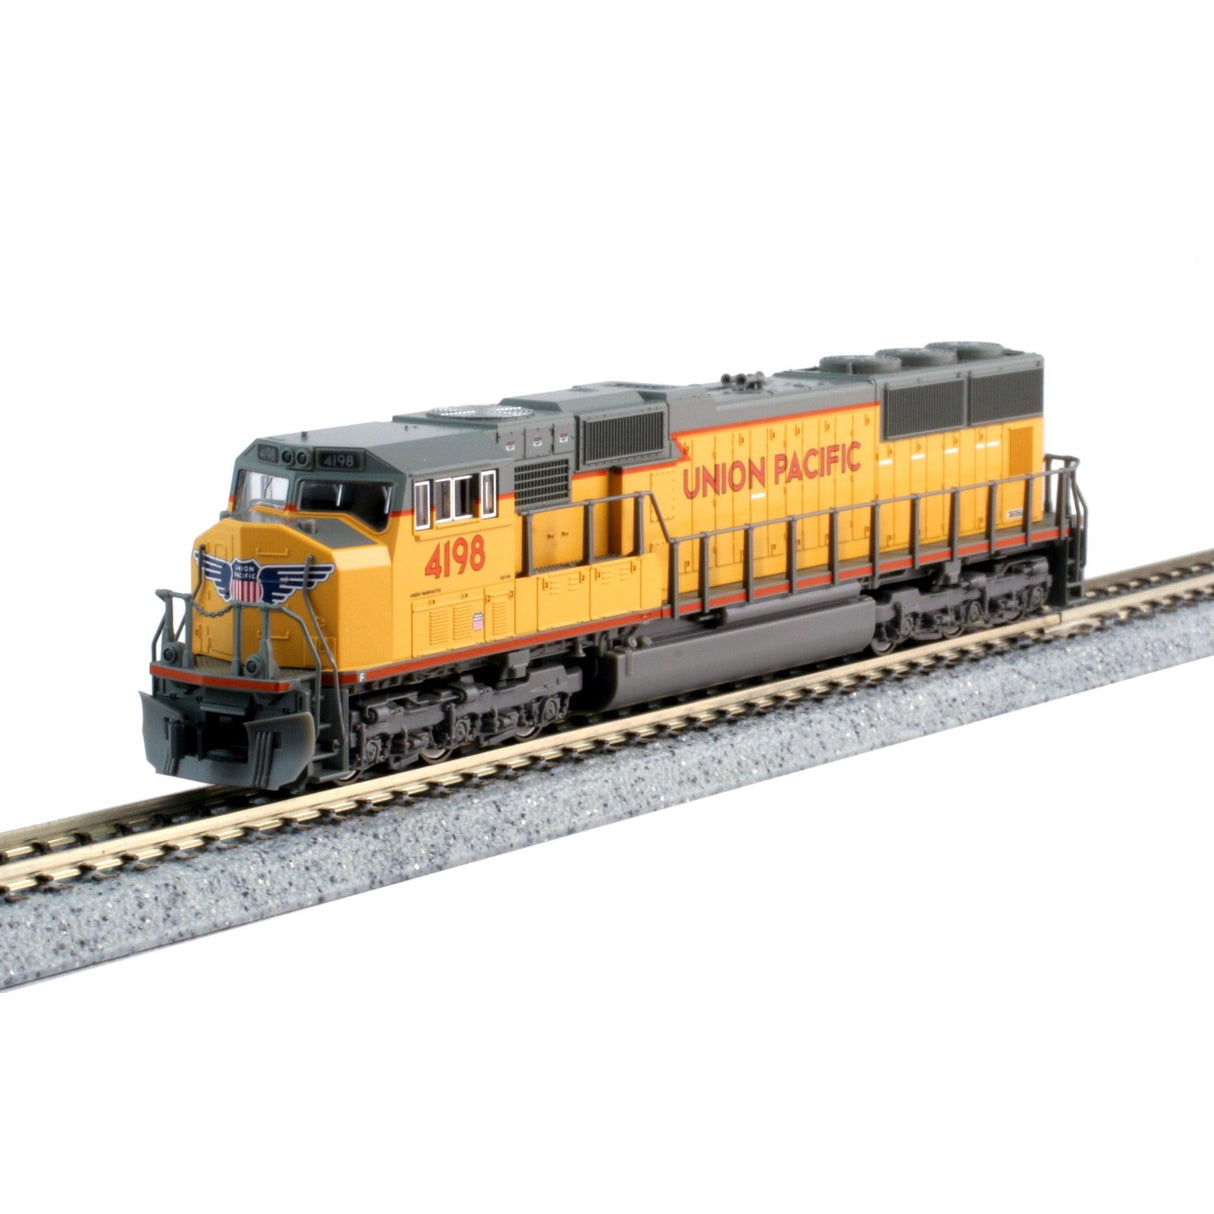 N Scale Scale UP Union Pacific EMD SD70M Locomotive 4198 With ESU LokSound V5 KAT1767608-LS